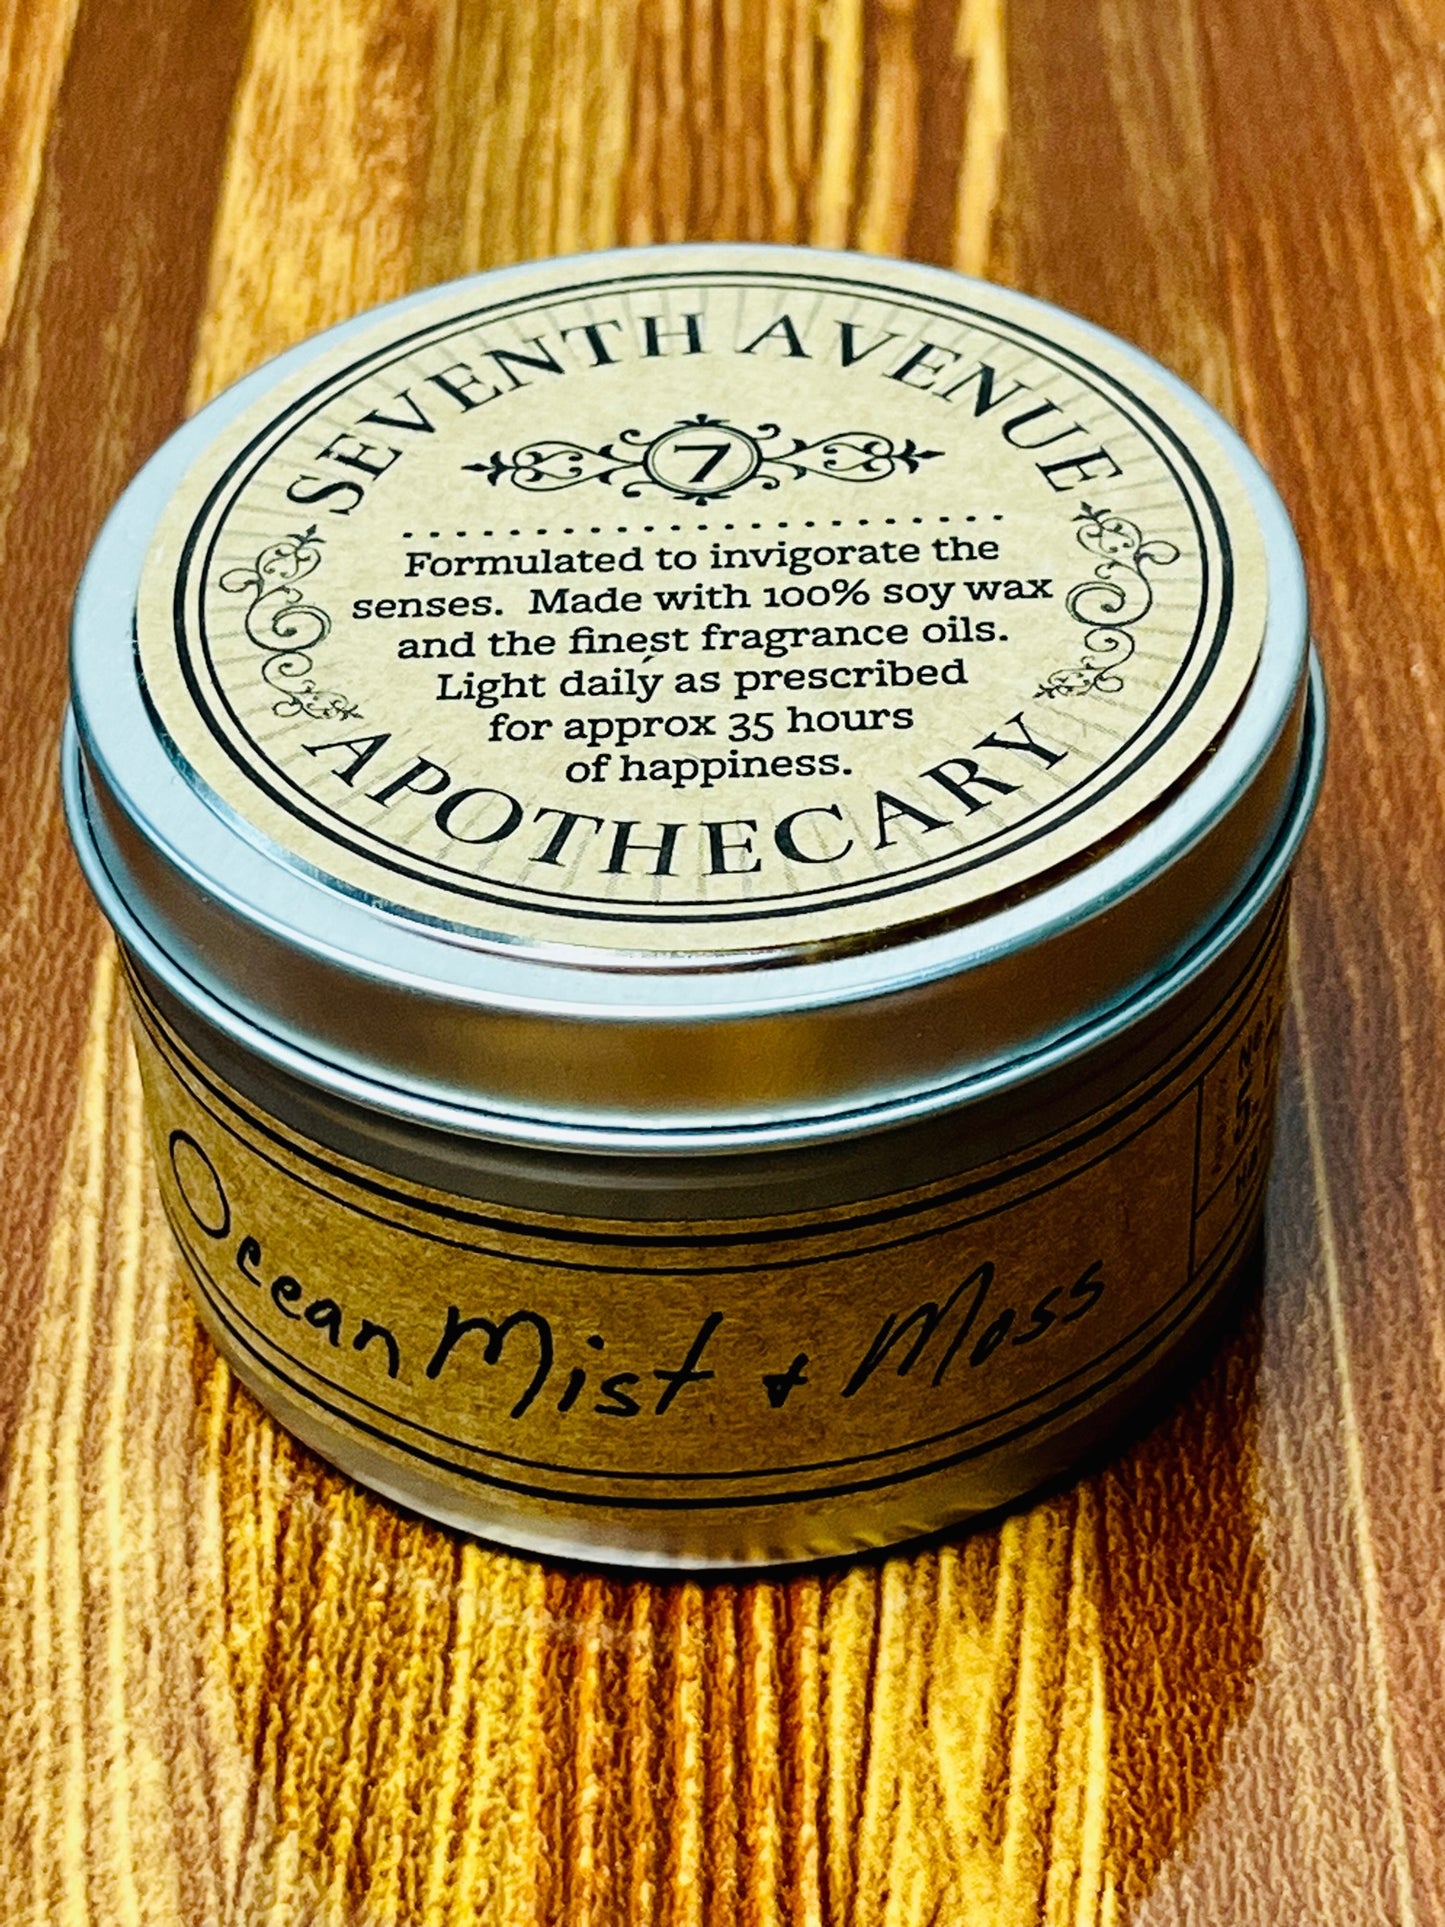 Seventh Avenue Apothecary Travel Tin Soy Candles